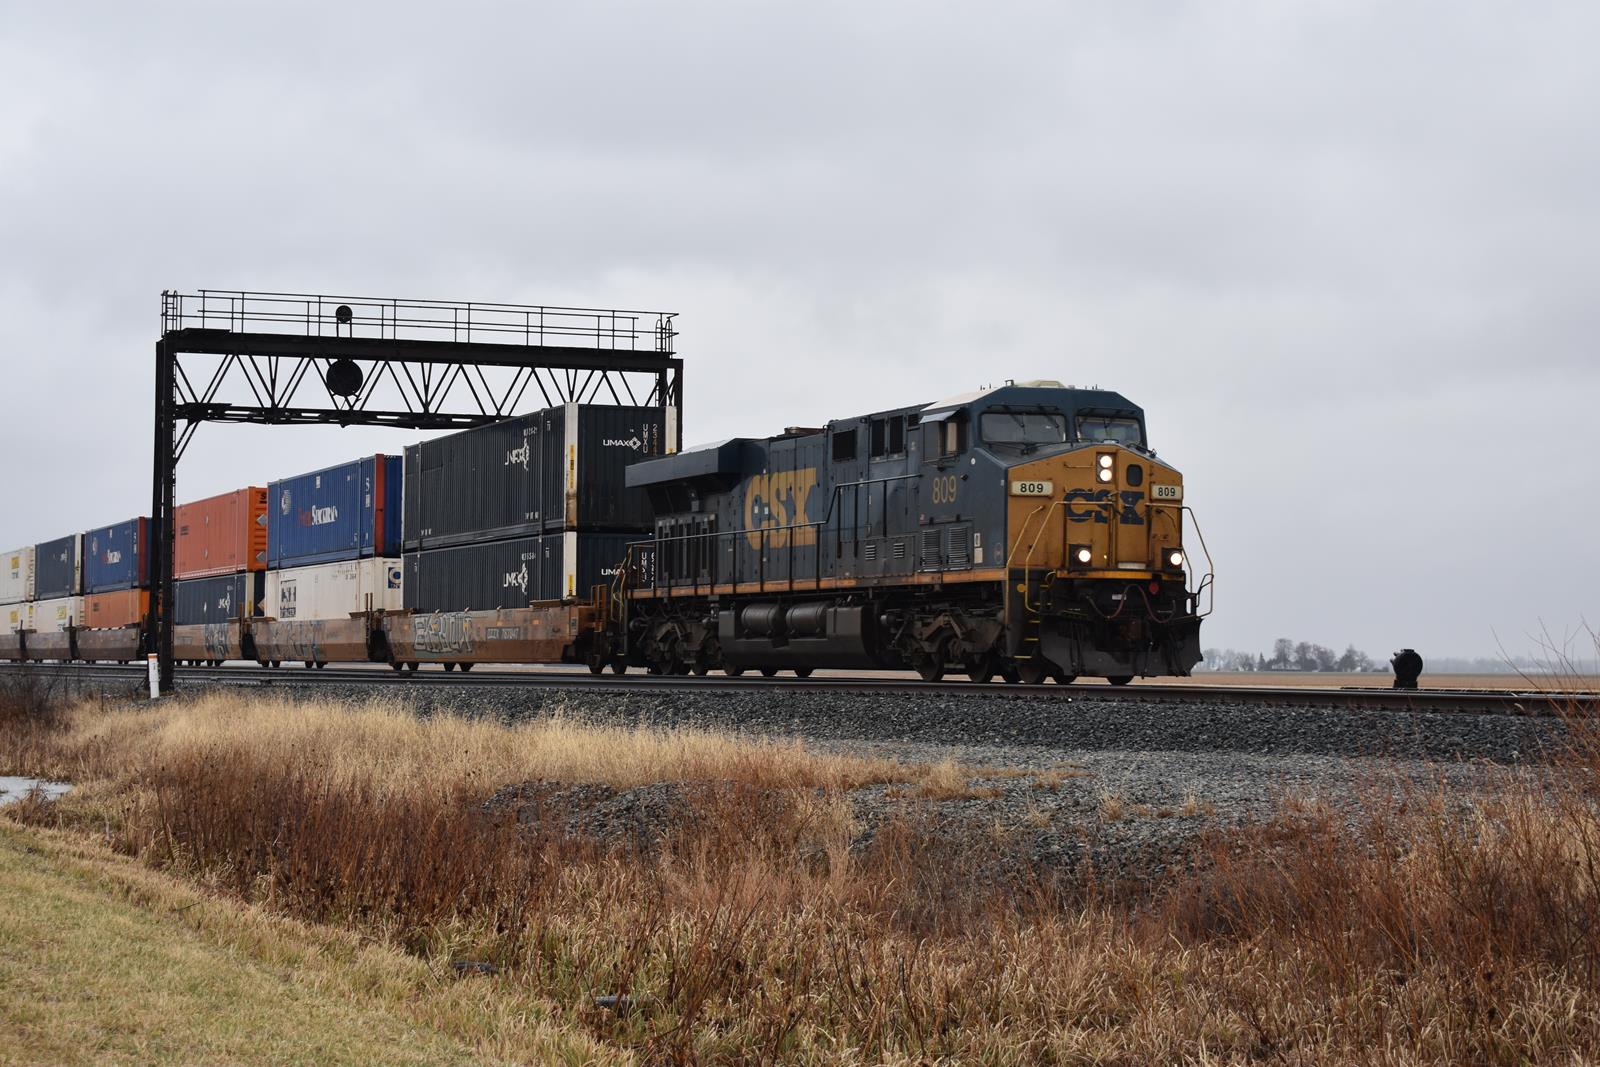 CSXT 809 is a class GE ES44AC-H and  is pictured in Deshler, Ohio, USA.  This was taken along the CSX Toledo Line on the CSX Transportation. Photo Copyright: James Ellison uploaded to Railroad Gallery on 11/30/2022. This photograph of CSXT 809 was taken on Saturday, March 19, 2022. All Rights Reserved. 